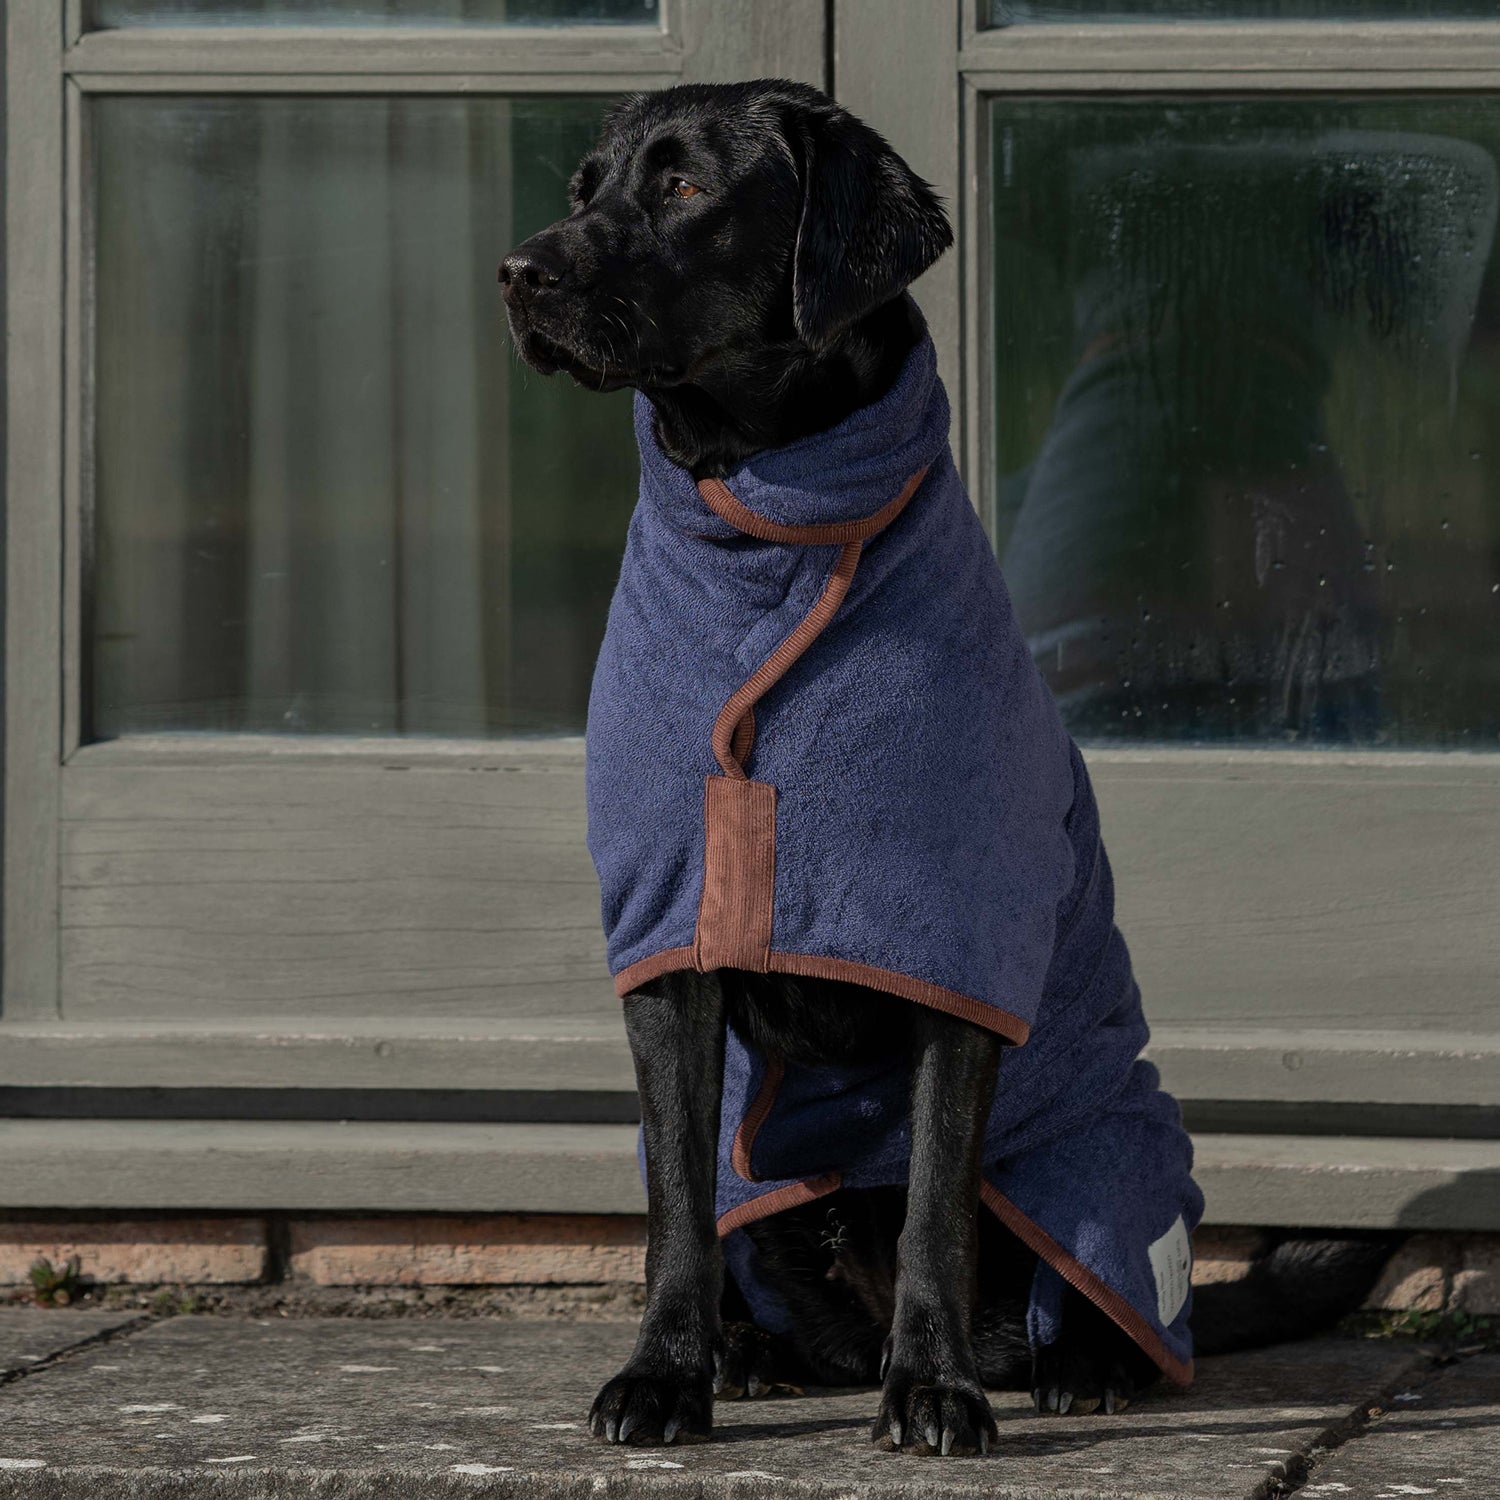 NEW Country Dog Drying Coat - French Navy